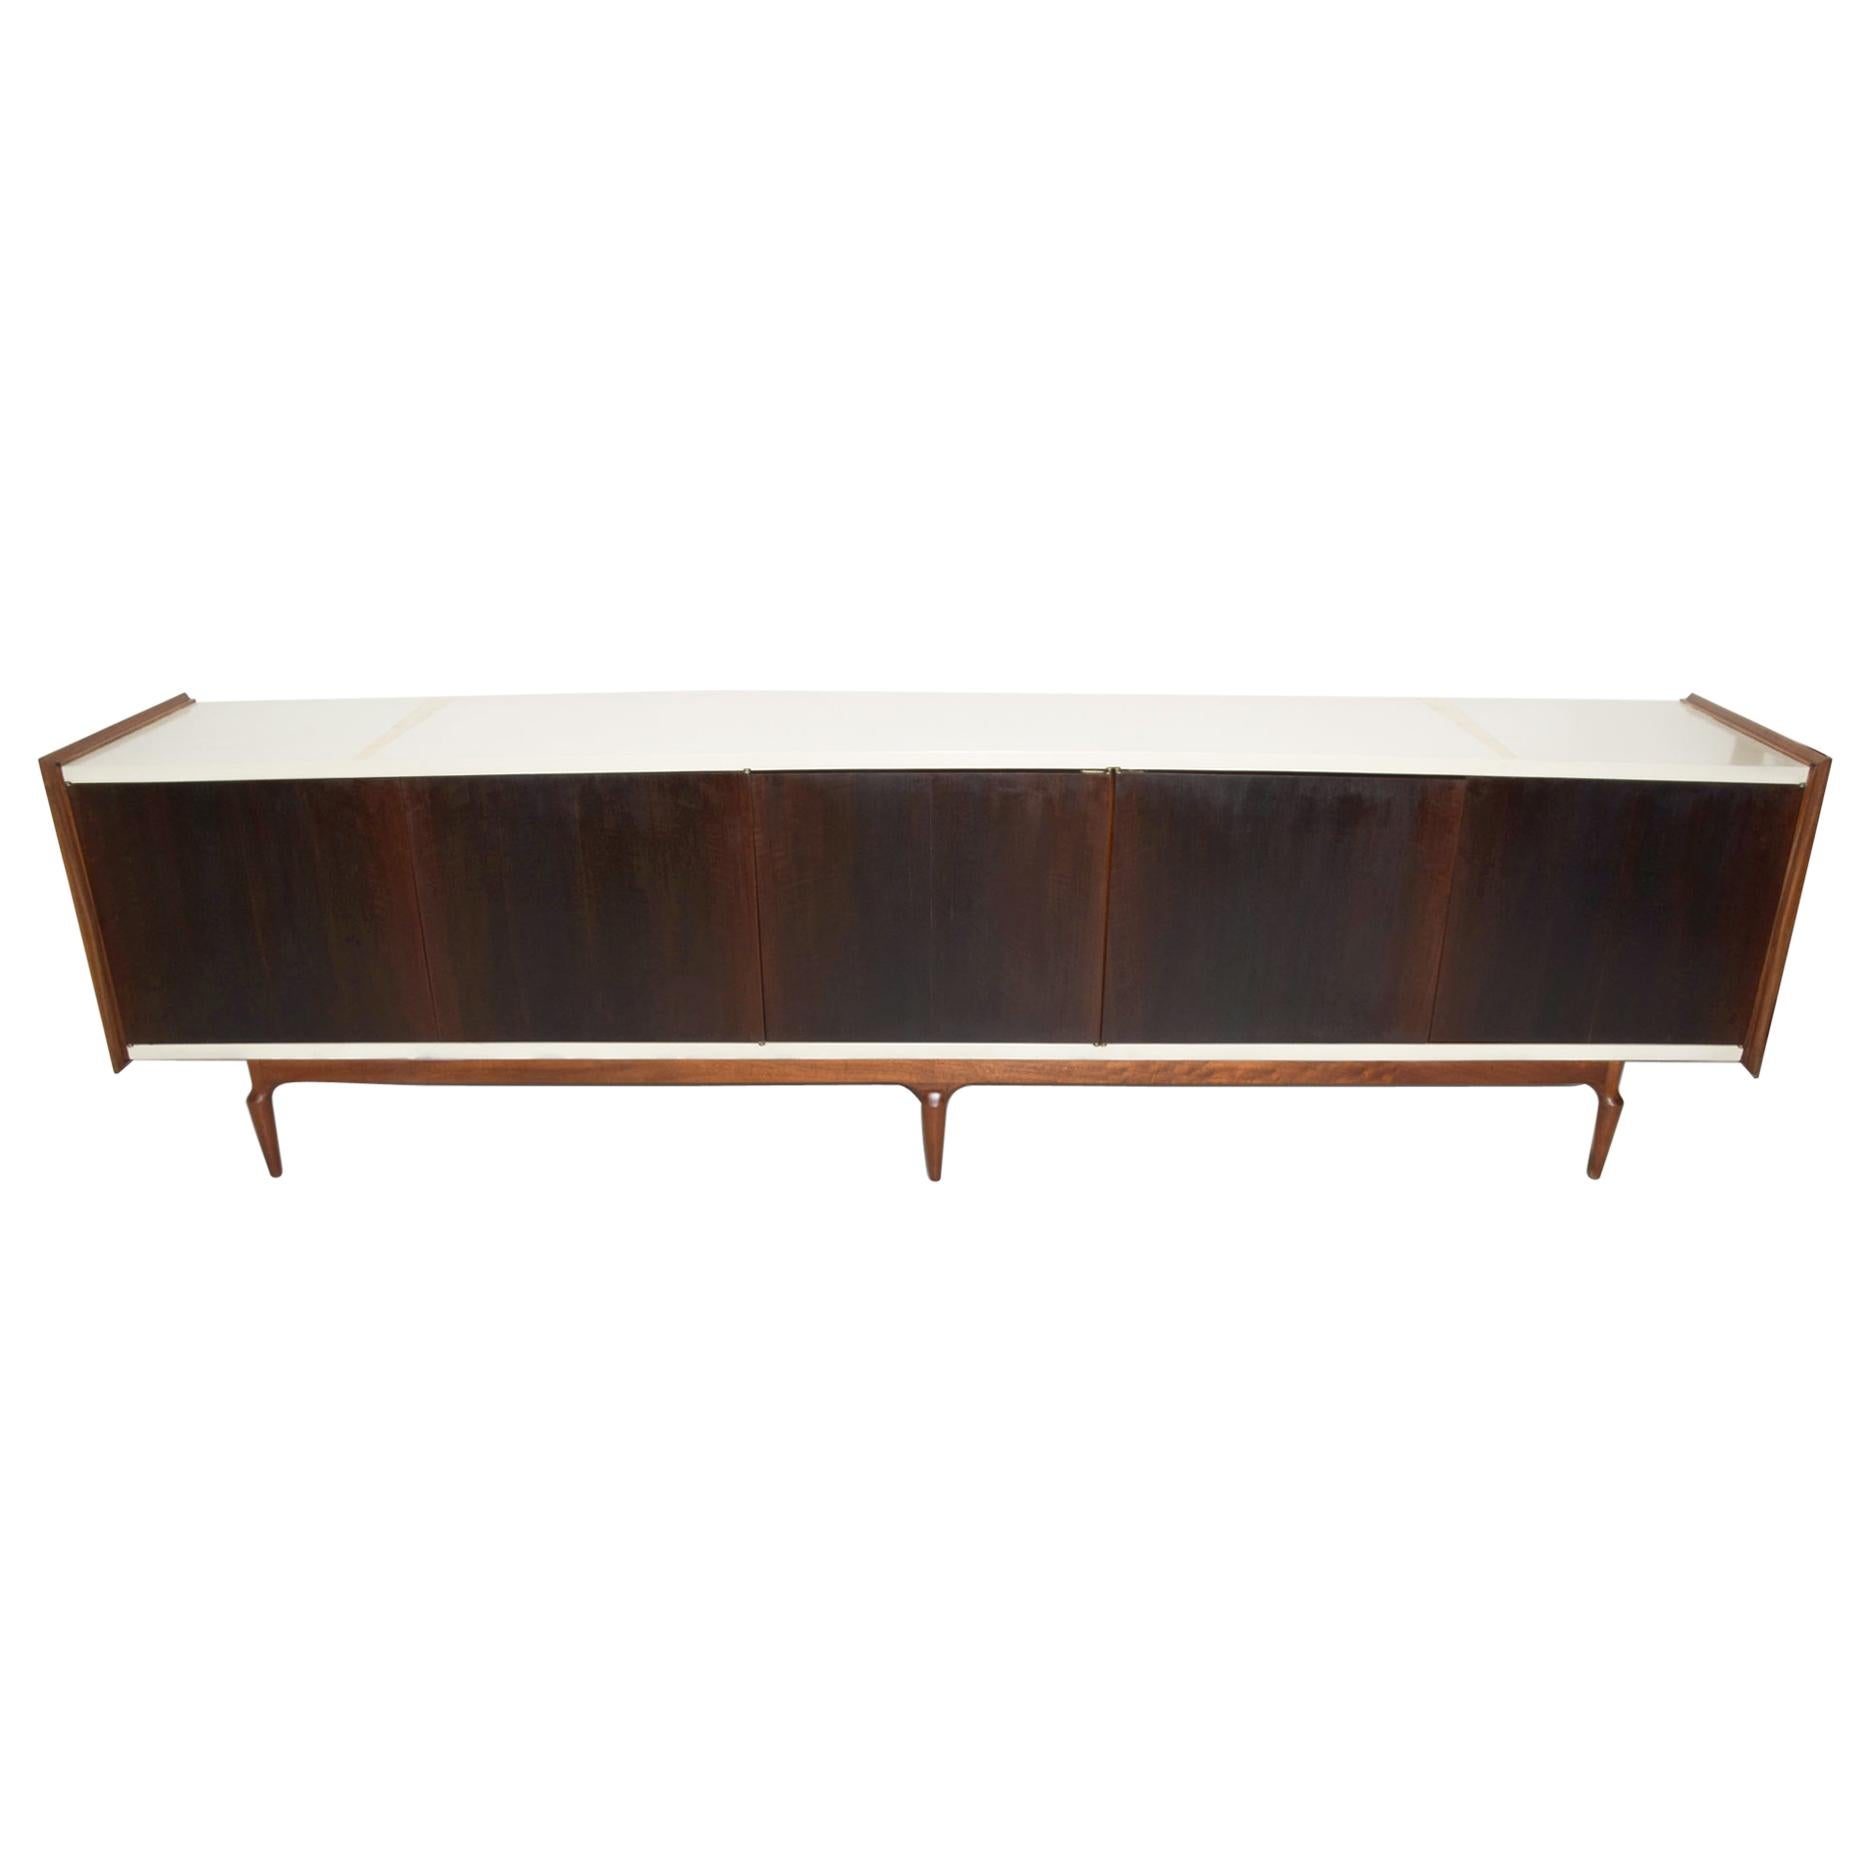 1960s Magnificently Long Credenza Two Tone Lacquer & Wood Monterrey, Mexico For Sale